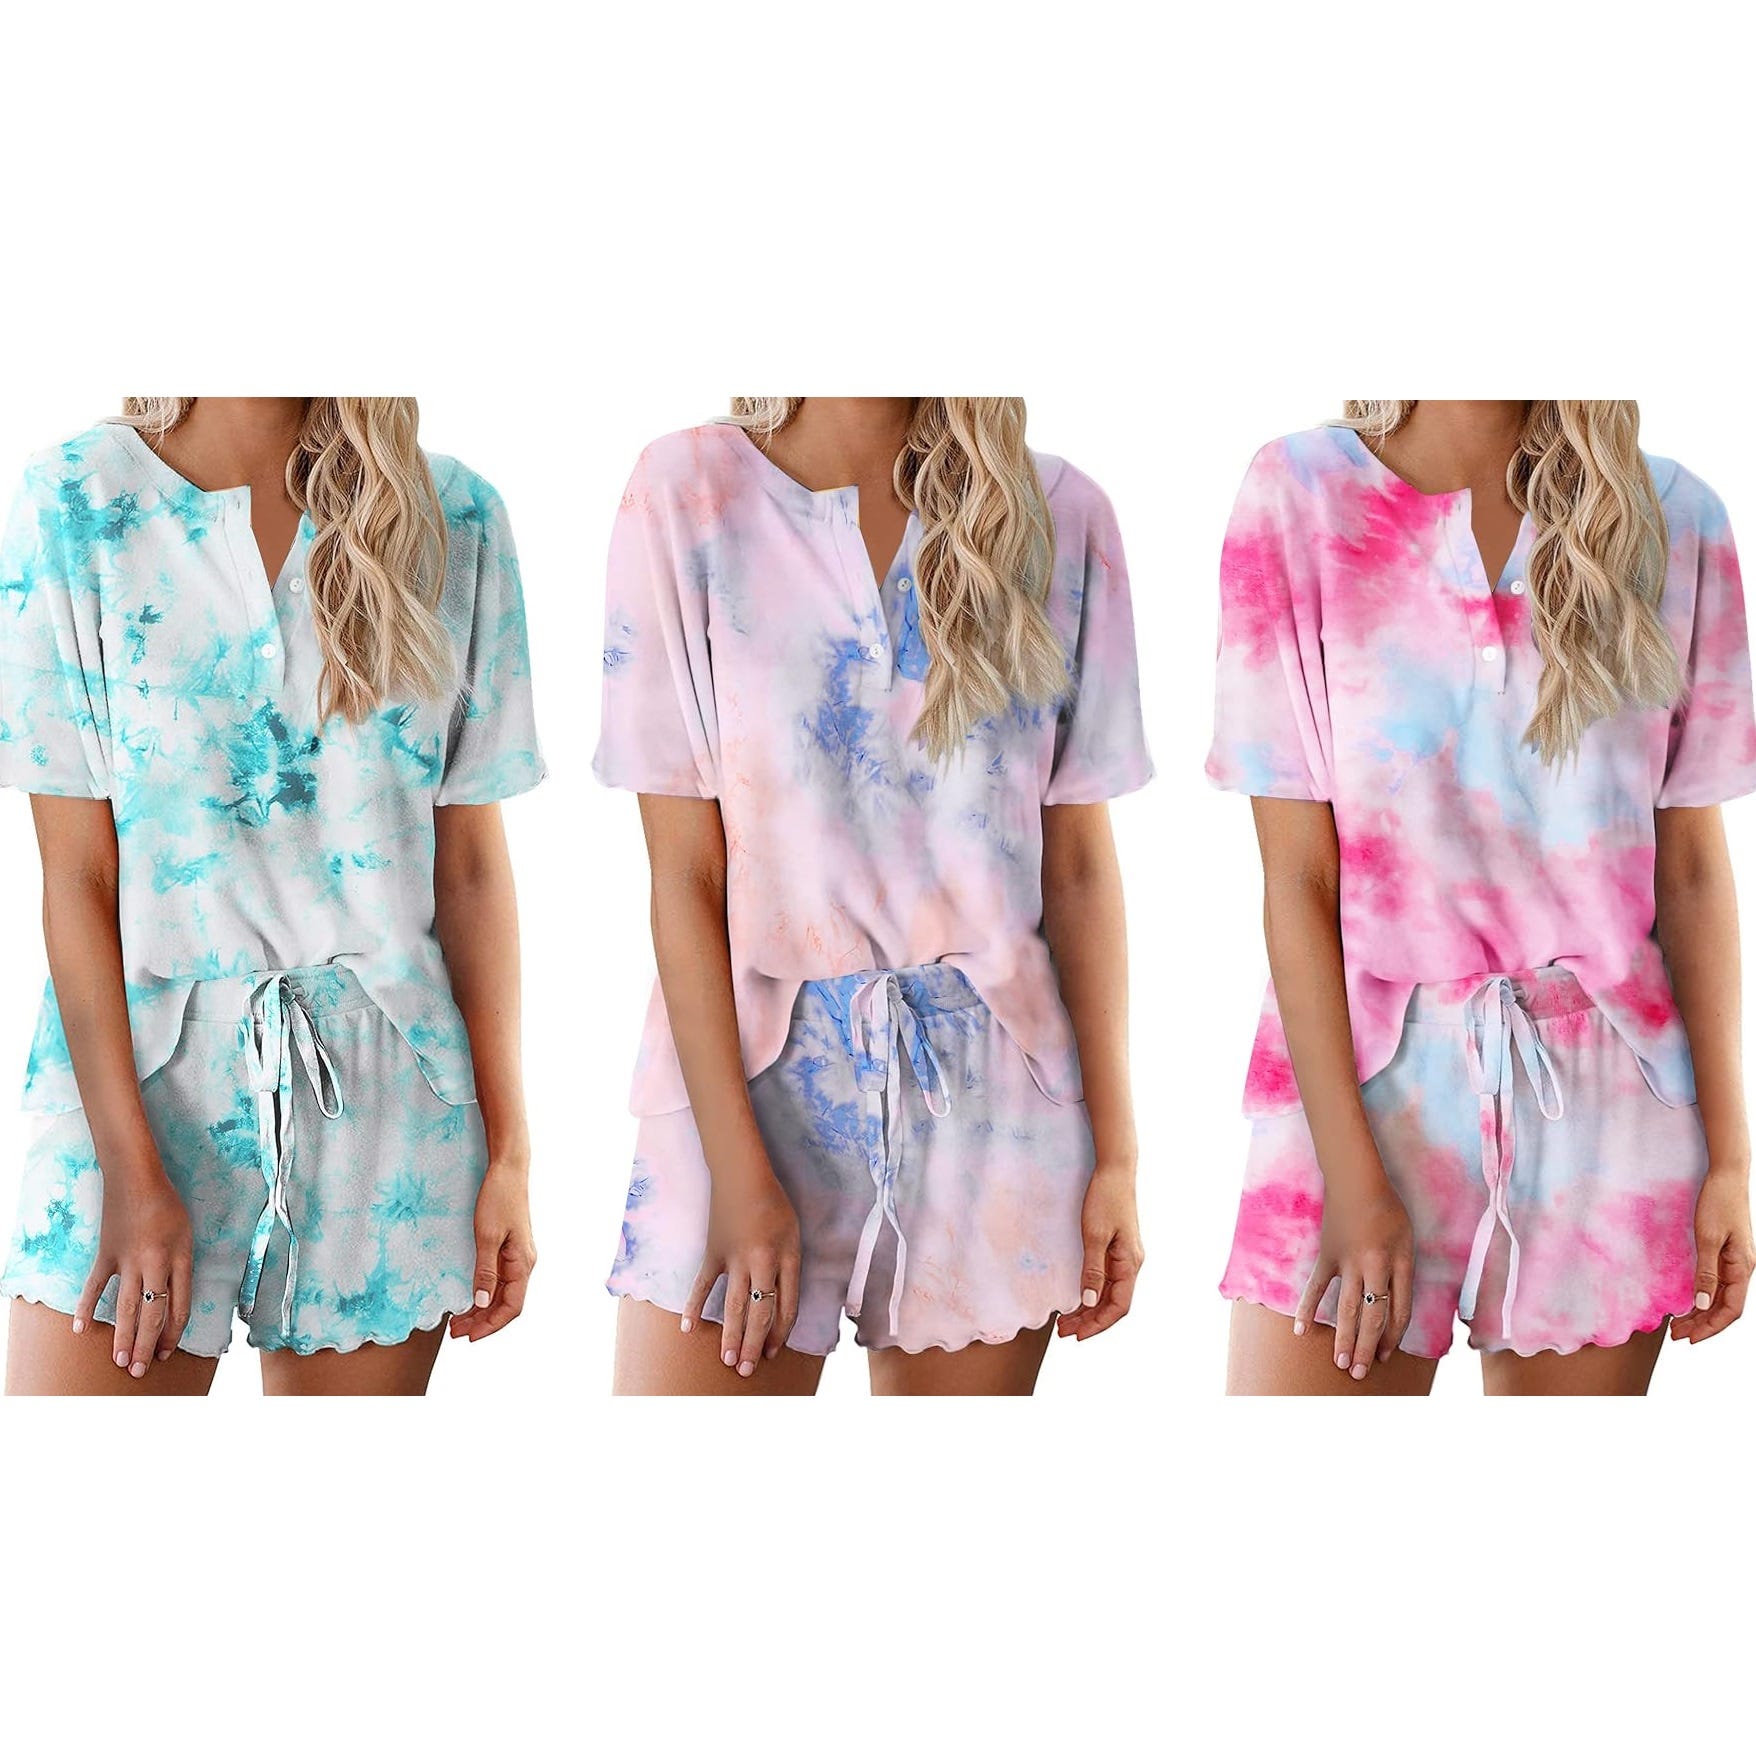 Three tie-dye loungewear sets in blue, pink, and red combinations with short sleeves and drawstring shorts.